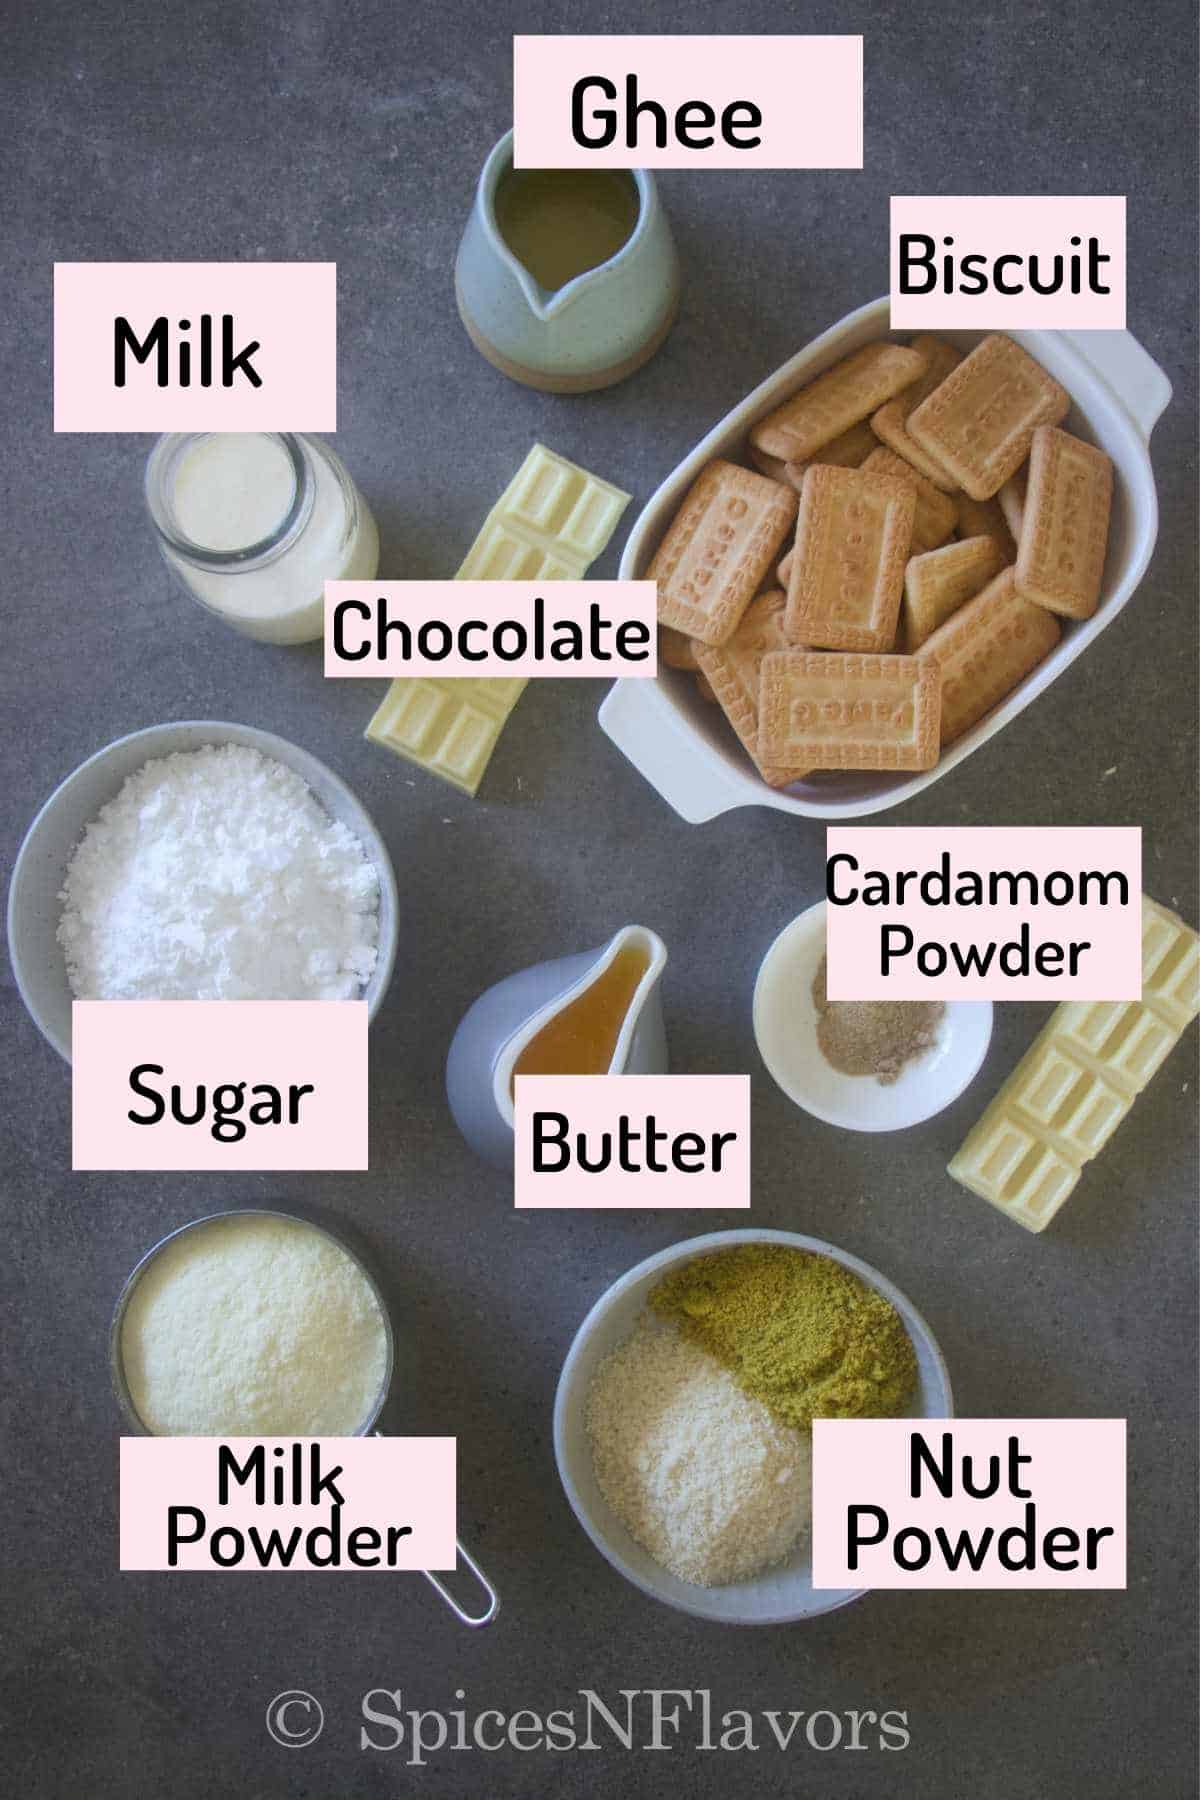 ingredients needed to make the burfi are arranged on a tile